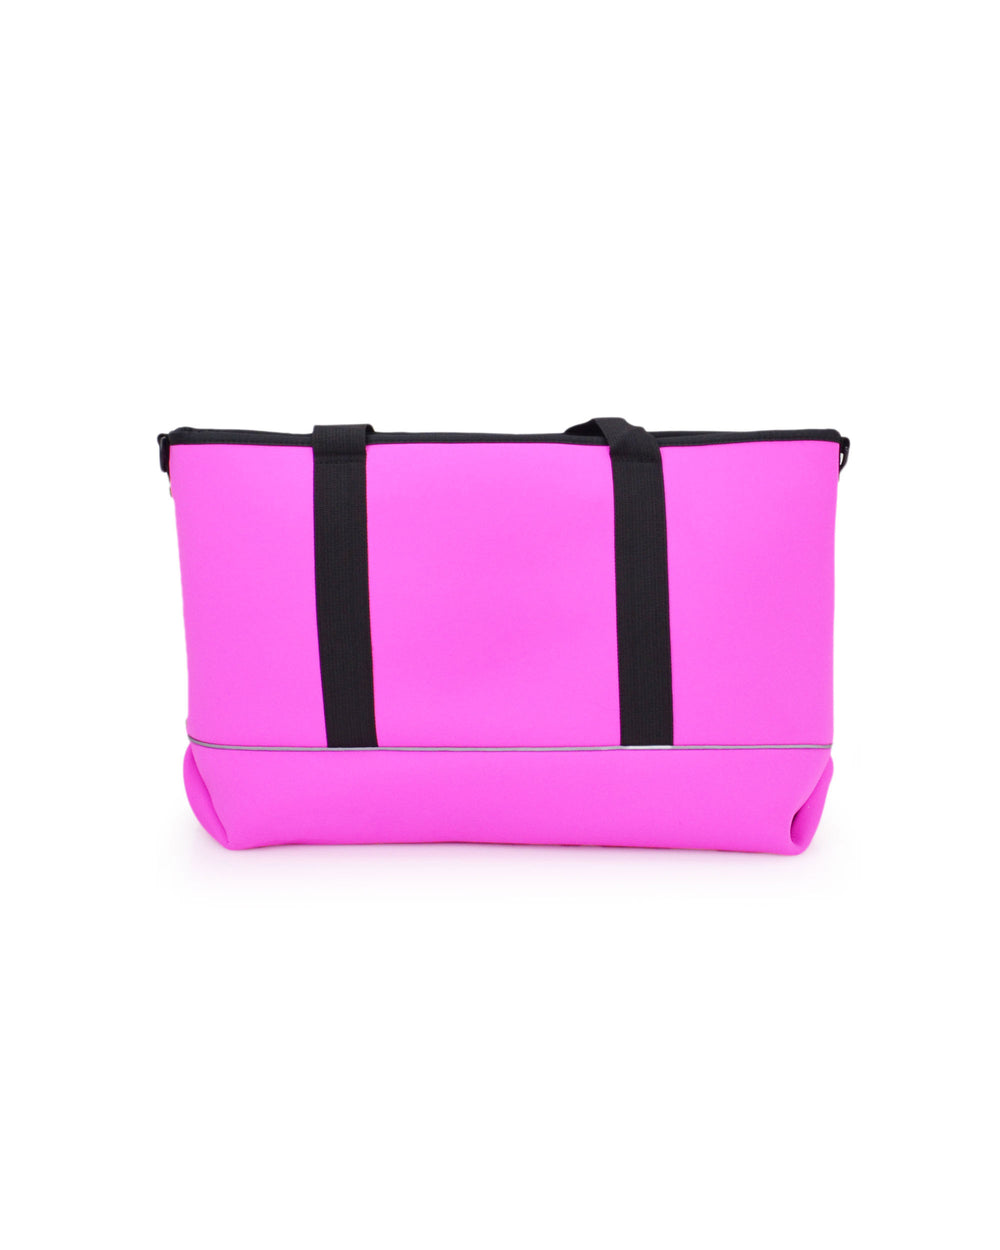 High Tide Medium All-Day Tote - Pink/Black